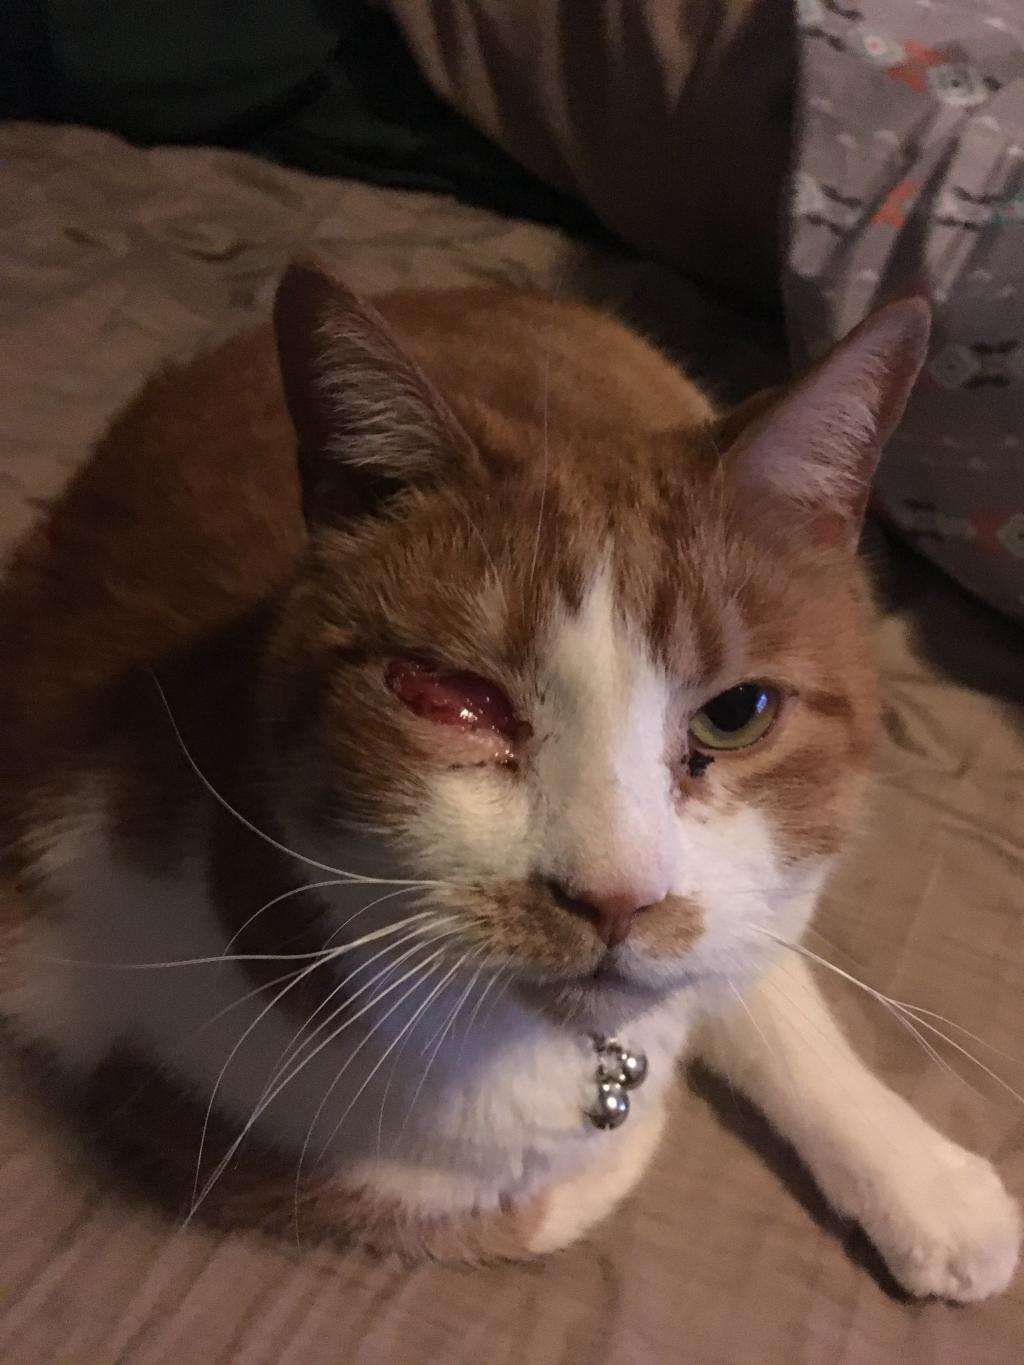 My cats left eye is swollen shut more than any photos I ...